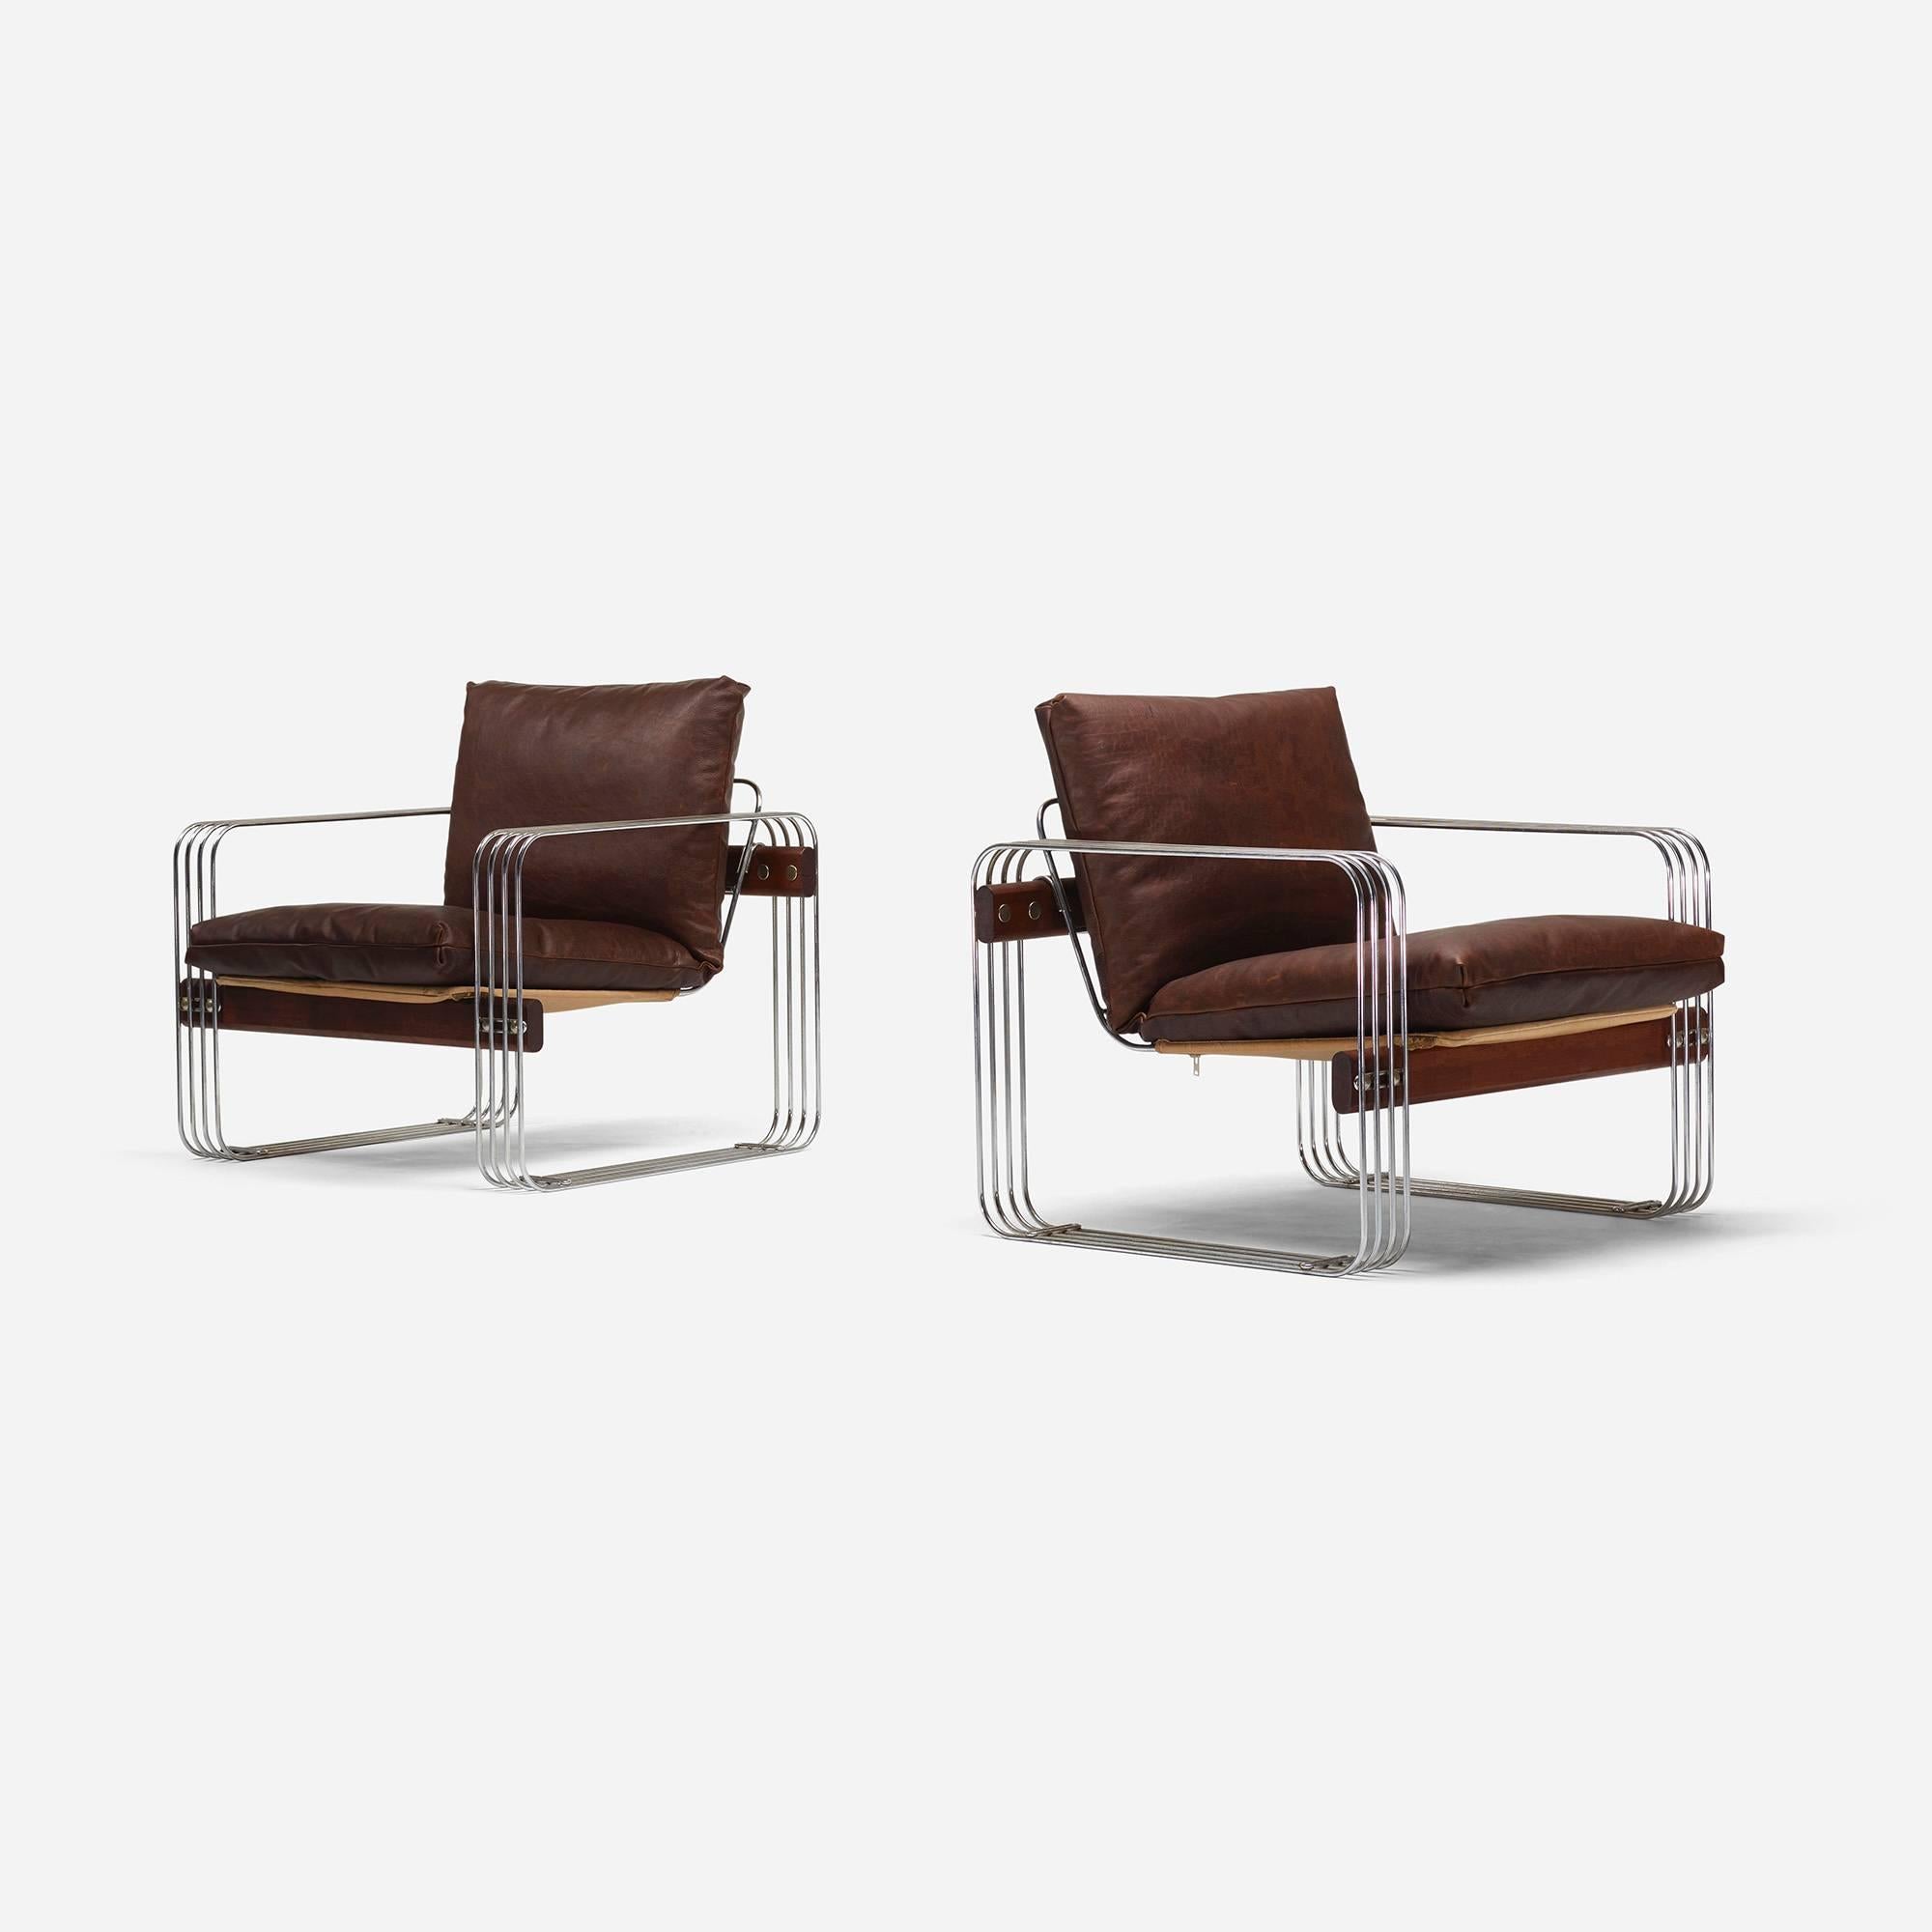 These unusual lounge chairs combine thick, distressed leather, chrome and stained wood.